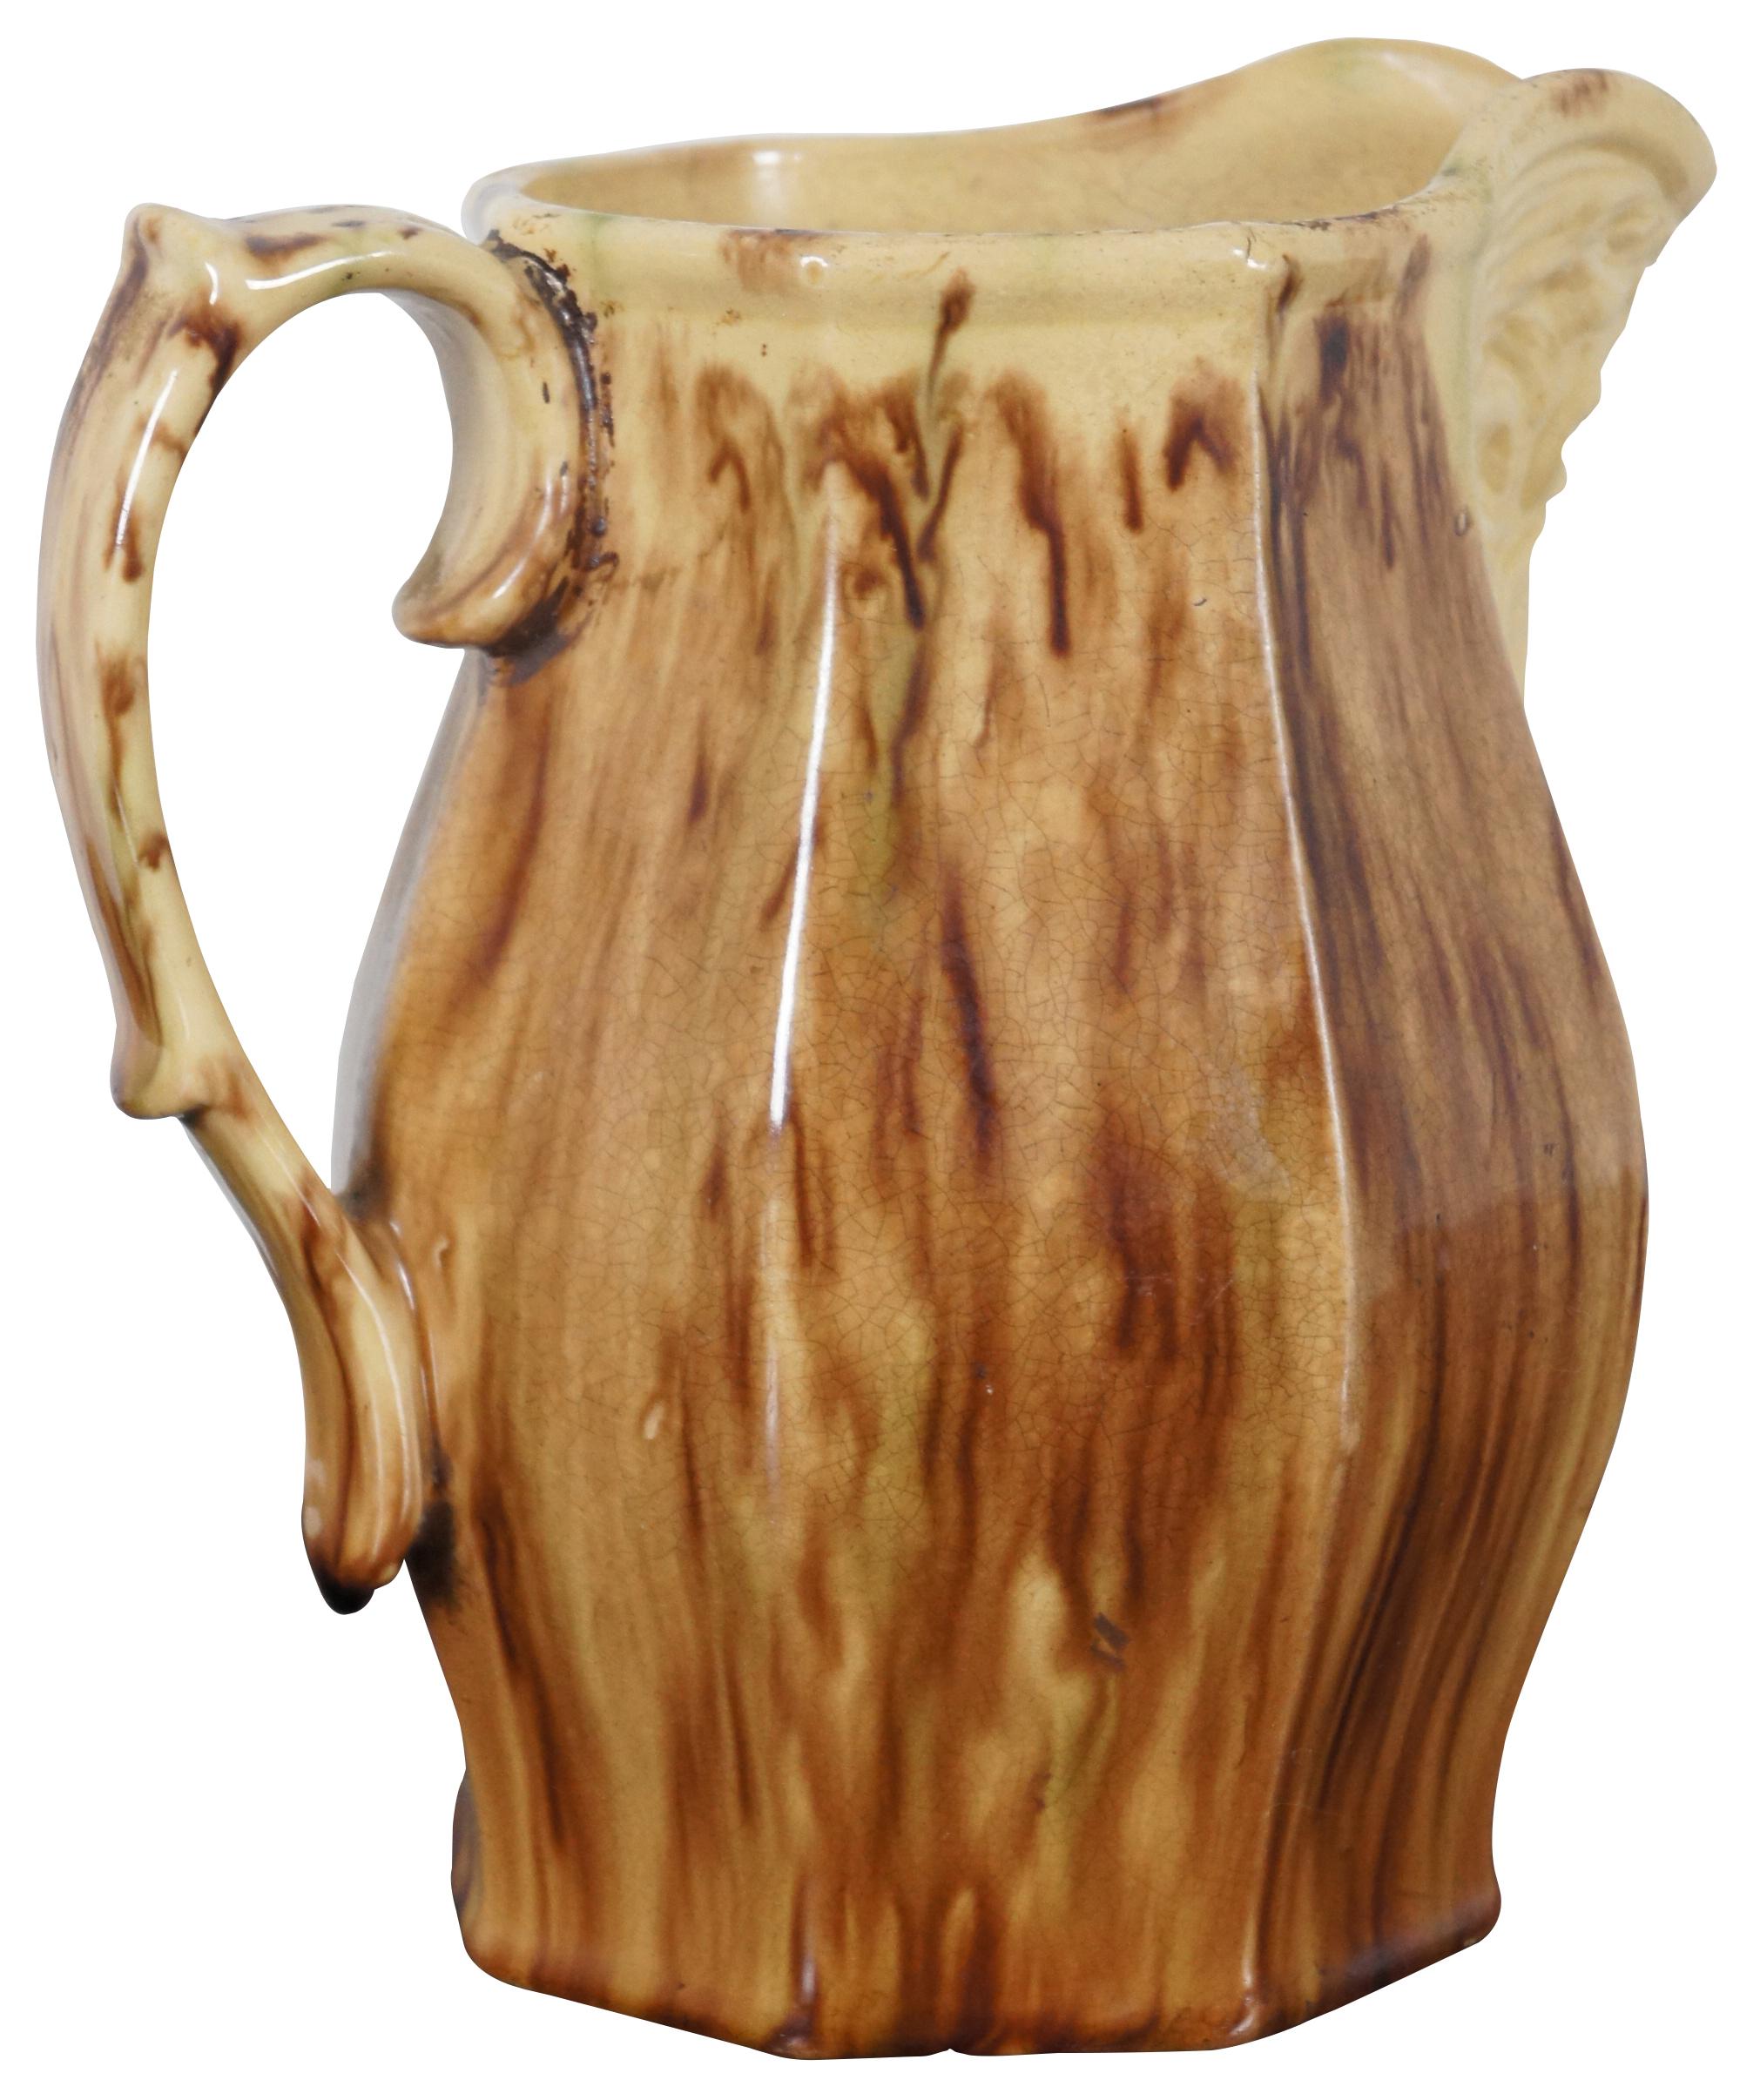 Antique Victorian majolica style pitcher with faceted sides, the face of a man with a beard under the spout and glazed coloring reminiscent of wood grain.
 